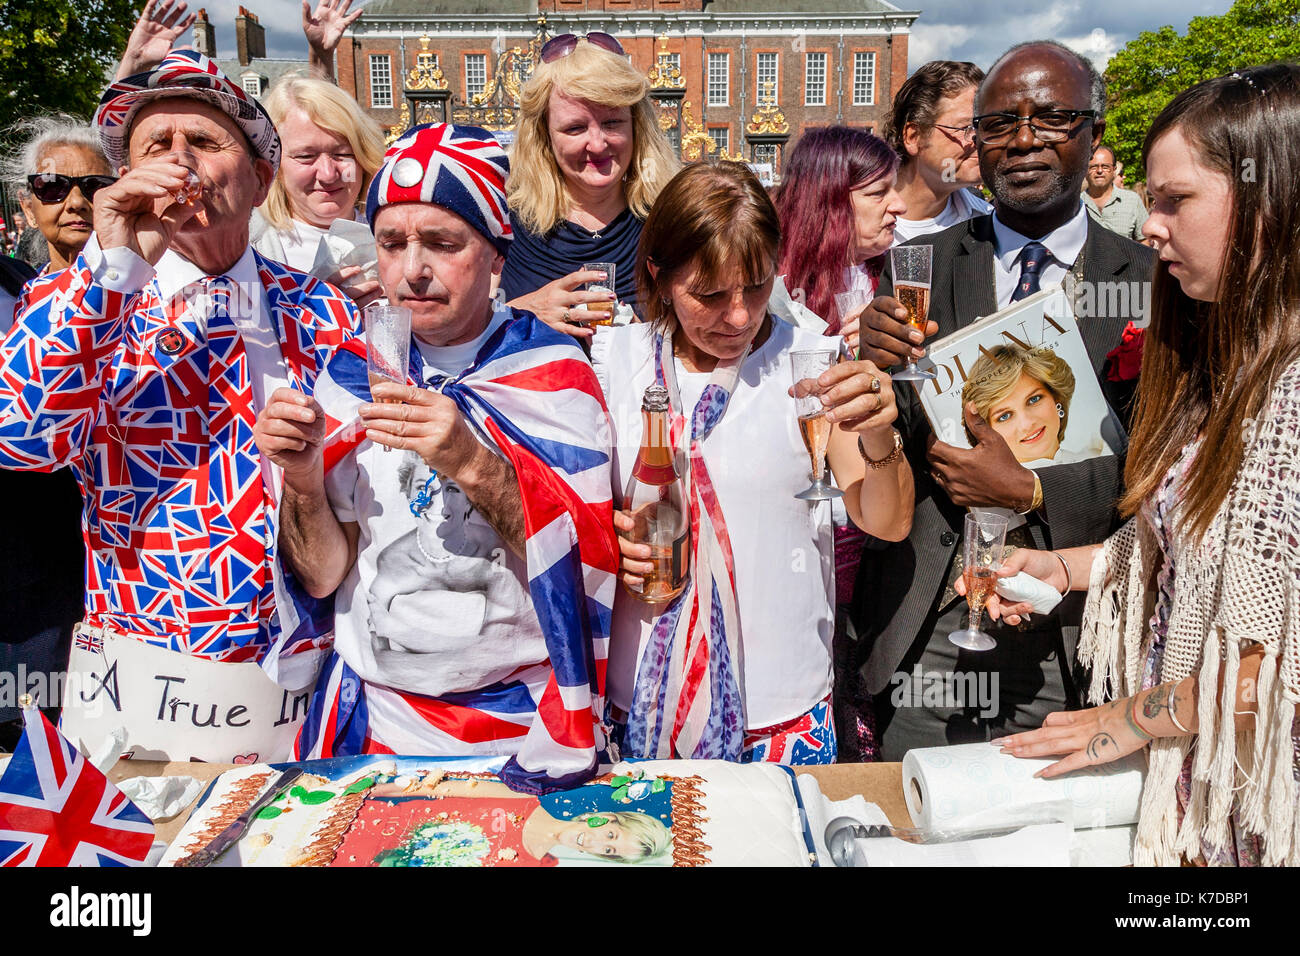 Supporters Of The Late Princess Diana Toast Her Memory With Glasses Of Champagne On The 20th Anniversary Of Her Death, Kensington Palace, London, UK Stock Photo